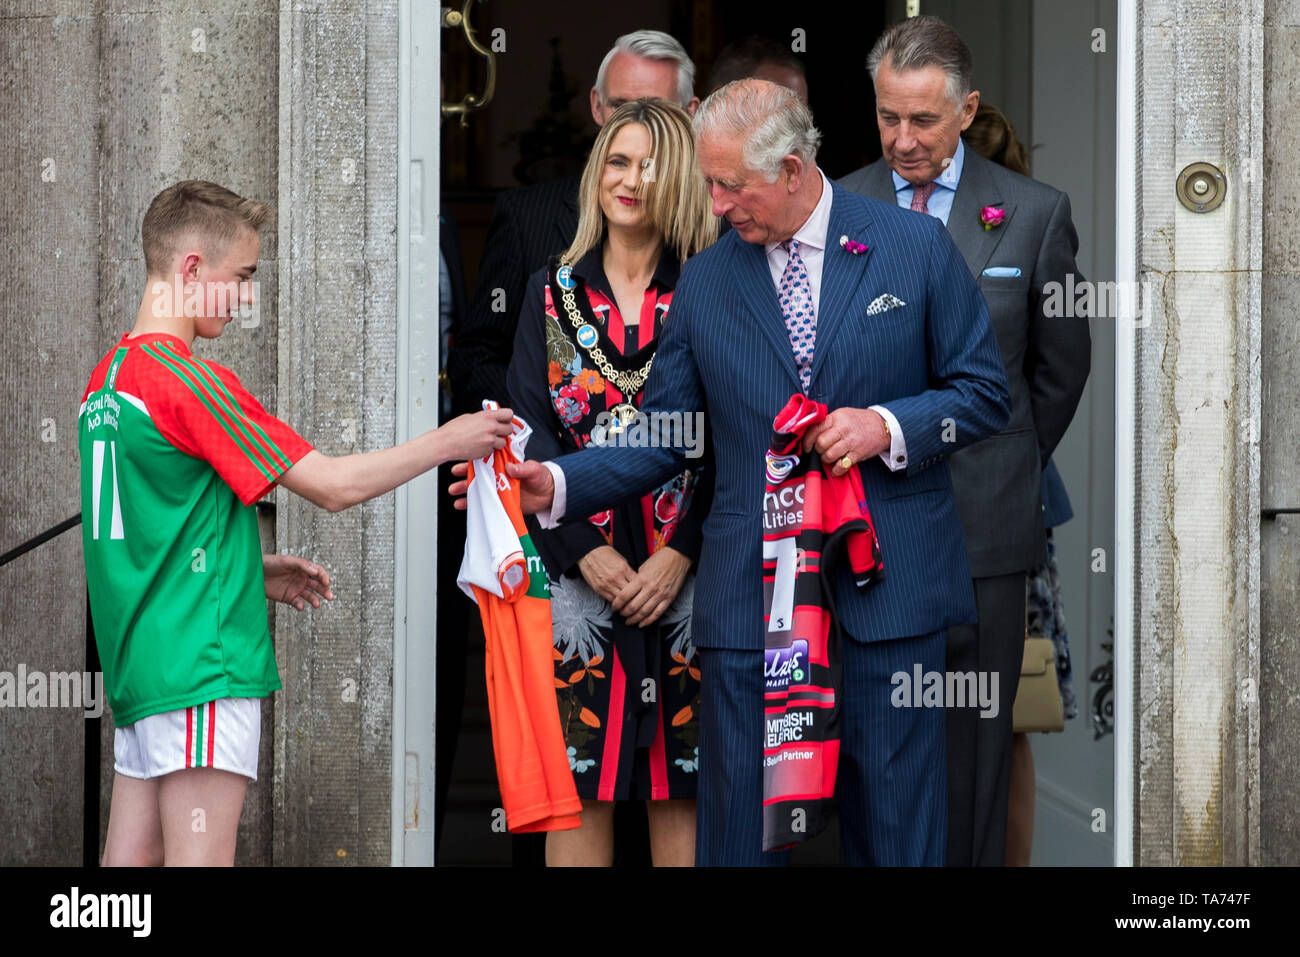 the-prince-of-wales-is-presented-with-an-armagh-gaa-county-jersey-by-st-patricks-grammar-school-armagh-pupil-ryan-mcalary-following-an-engagement-at-palace-demense-in-co-armagh-TA747F.jpg